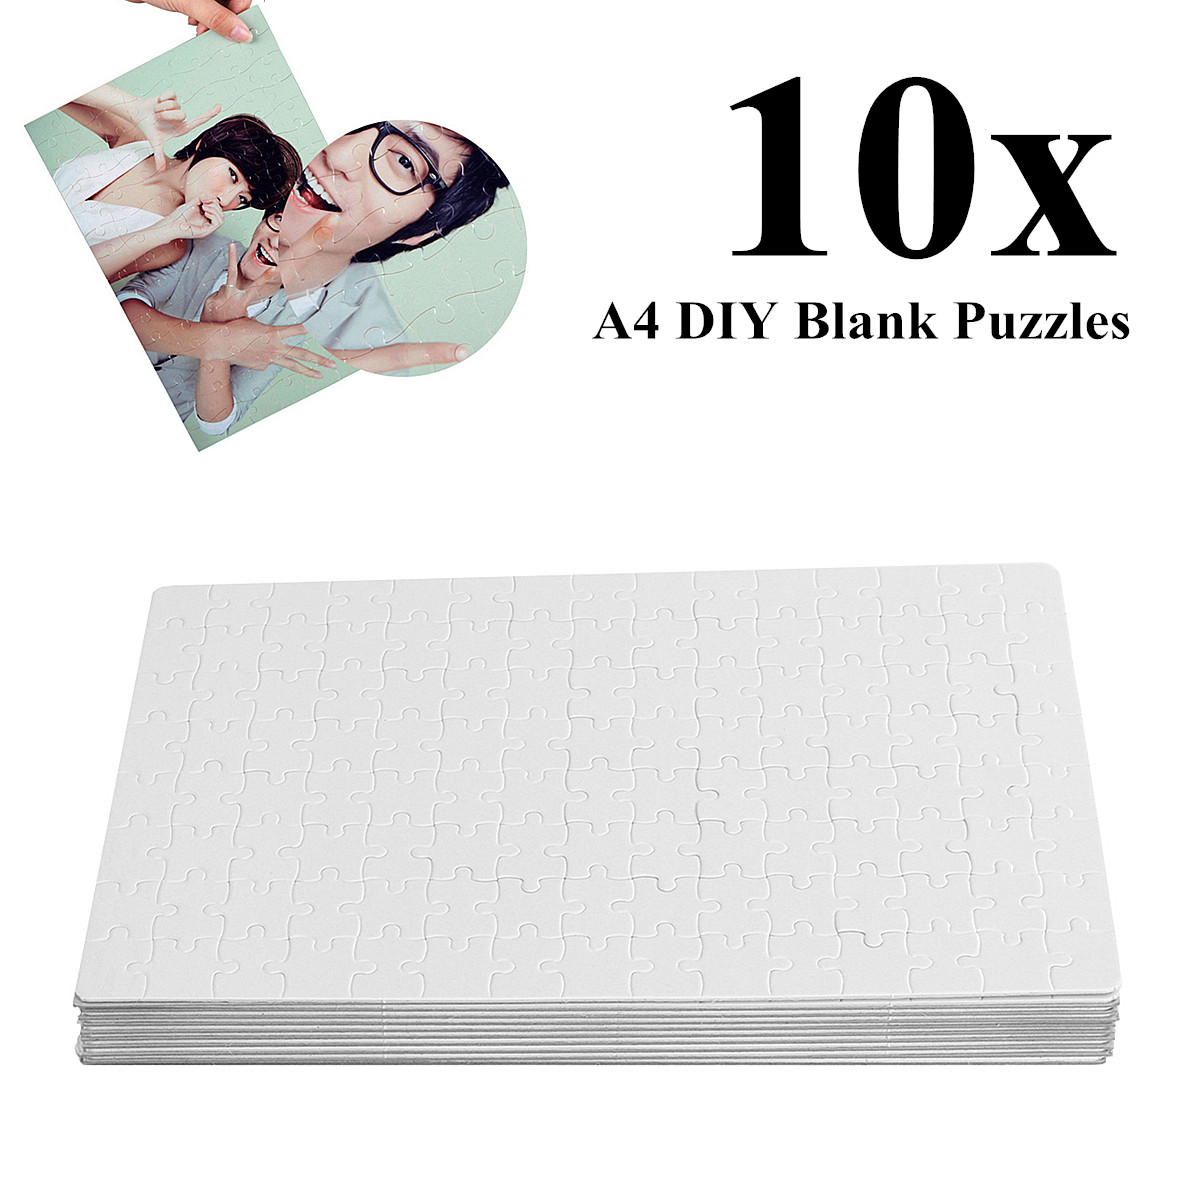 price history review on 10x a4 diy blank dye sublimation printable jigsaw puzzle for heat press machine sublimate your favorite image create unique gift aliexpress seller water sprite alitools io